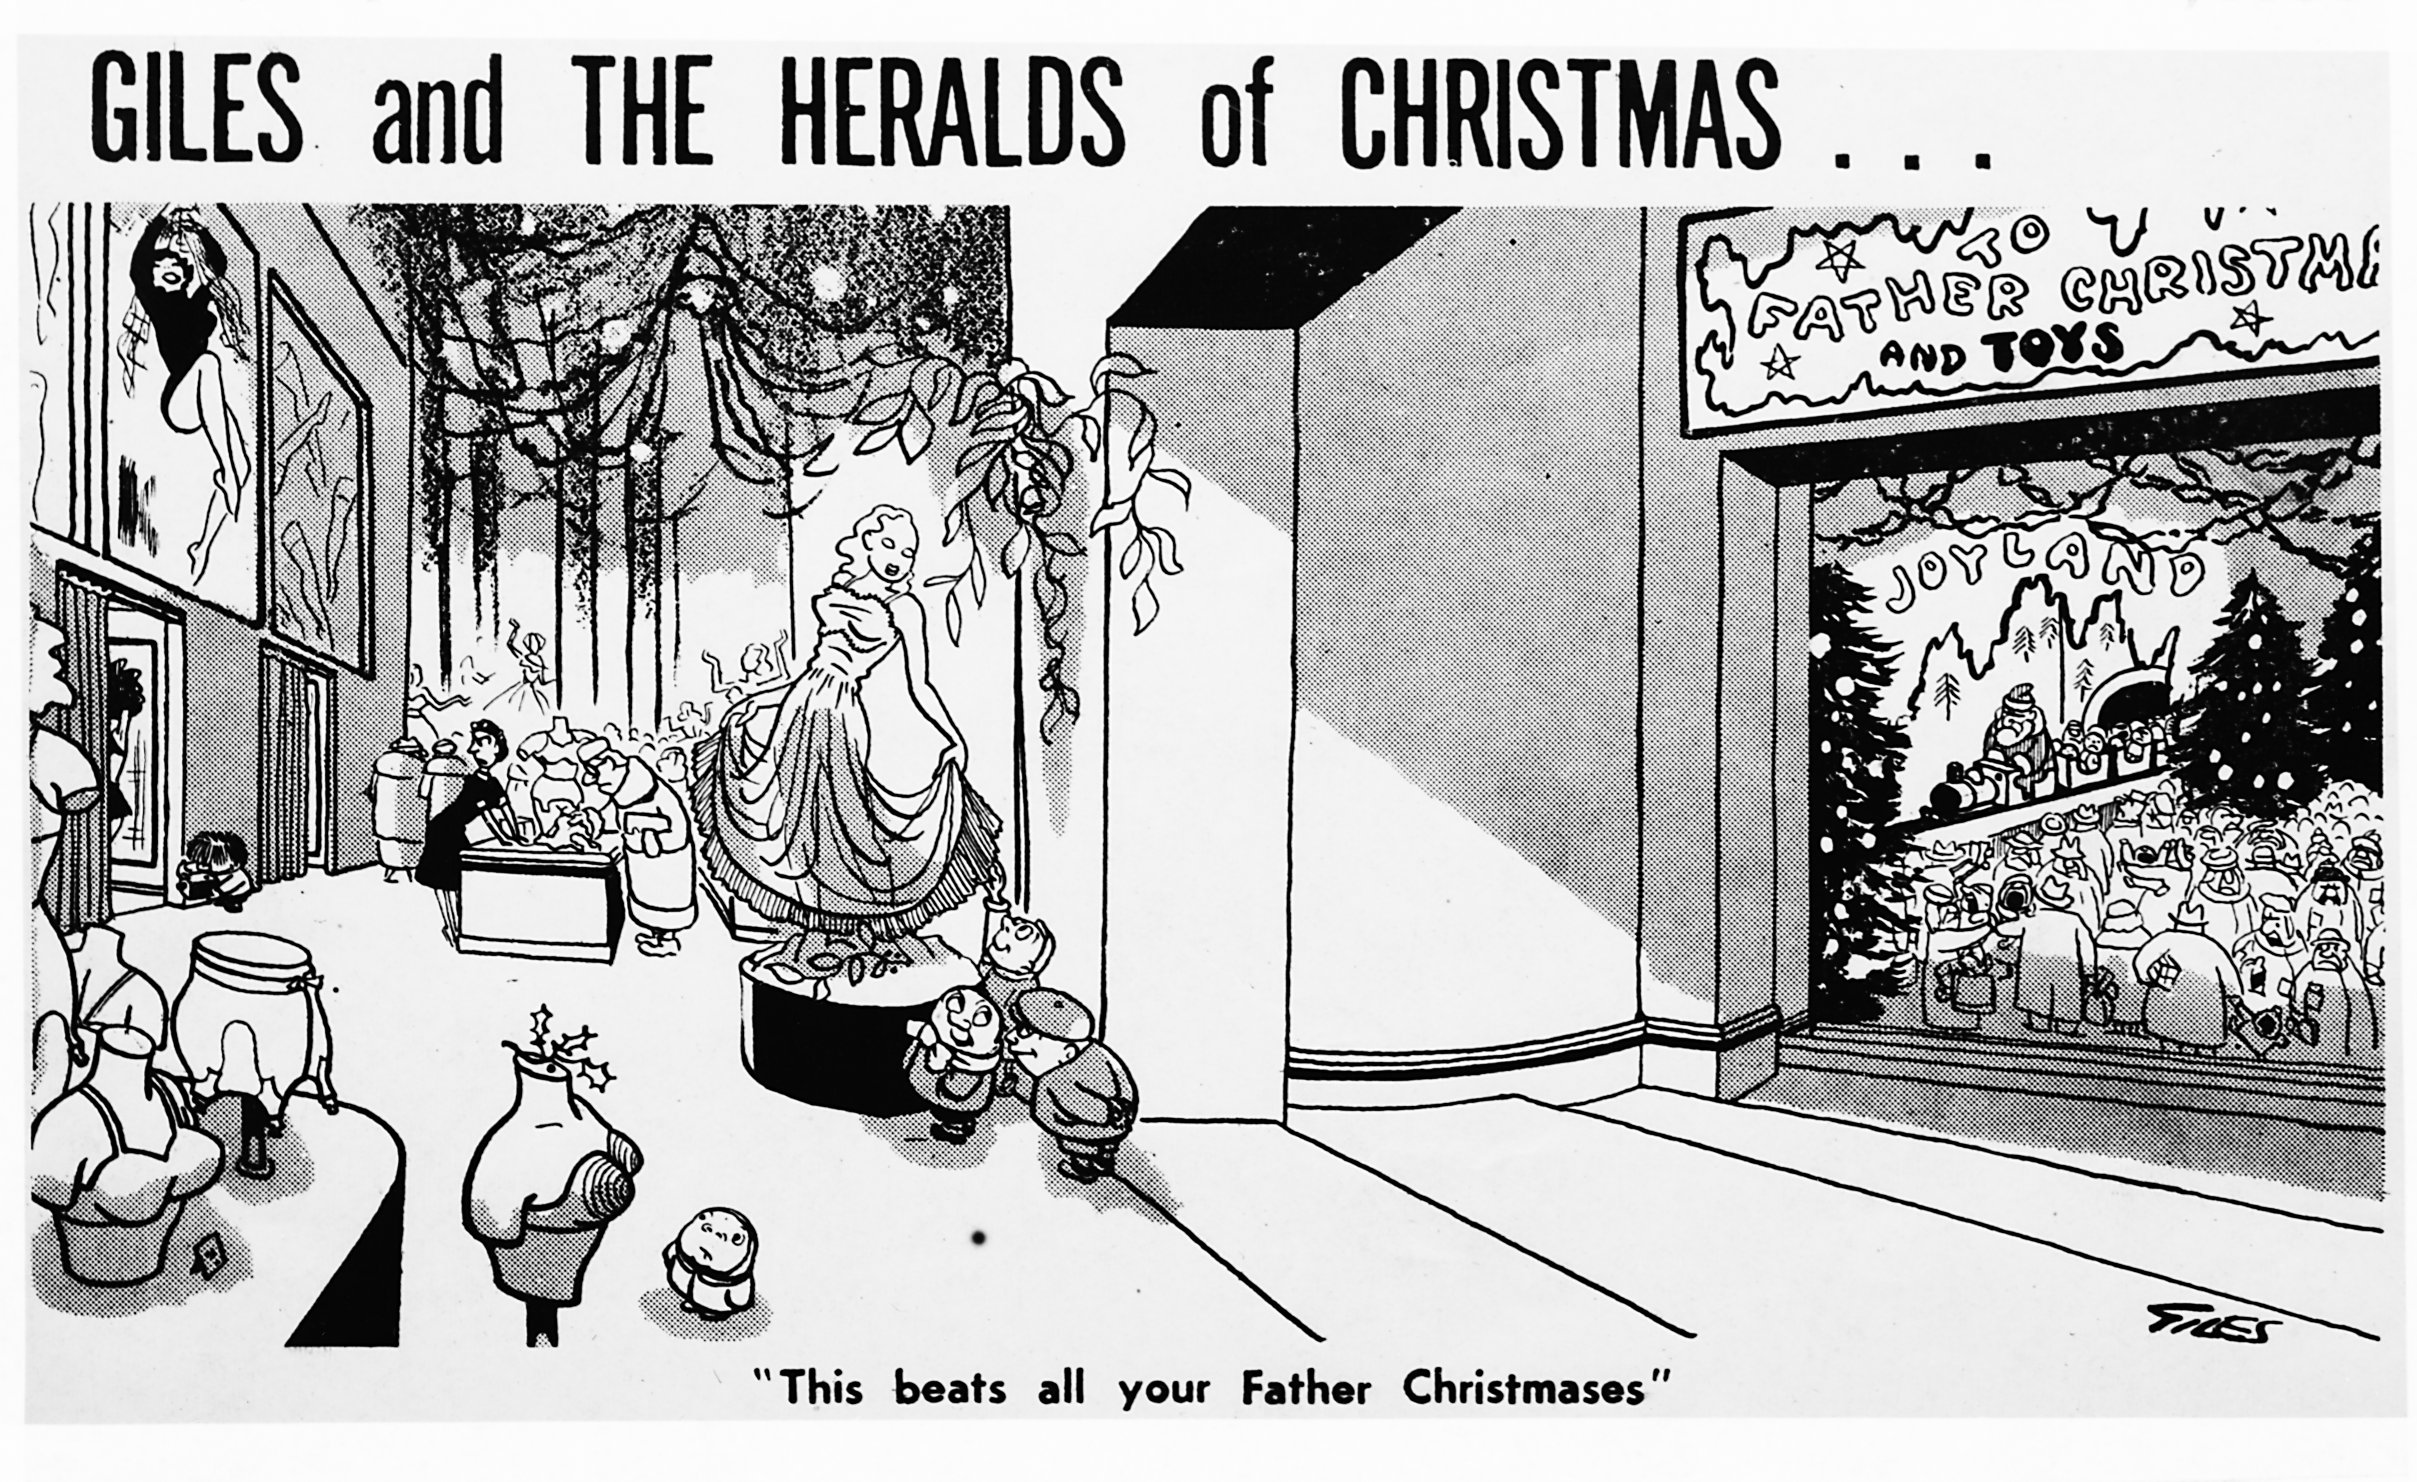 "This beats all your Father Christmases." - Carl Giles, Daily Express, 11 December 1956 (Image ref: GAN0166)